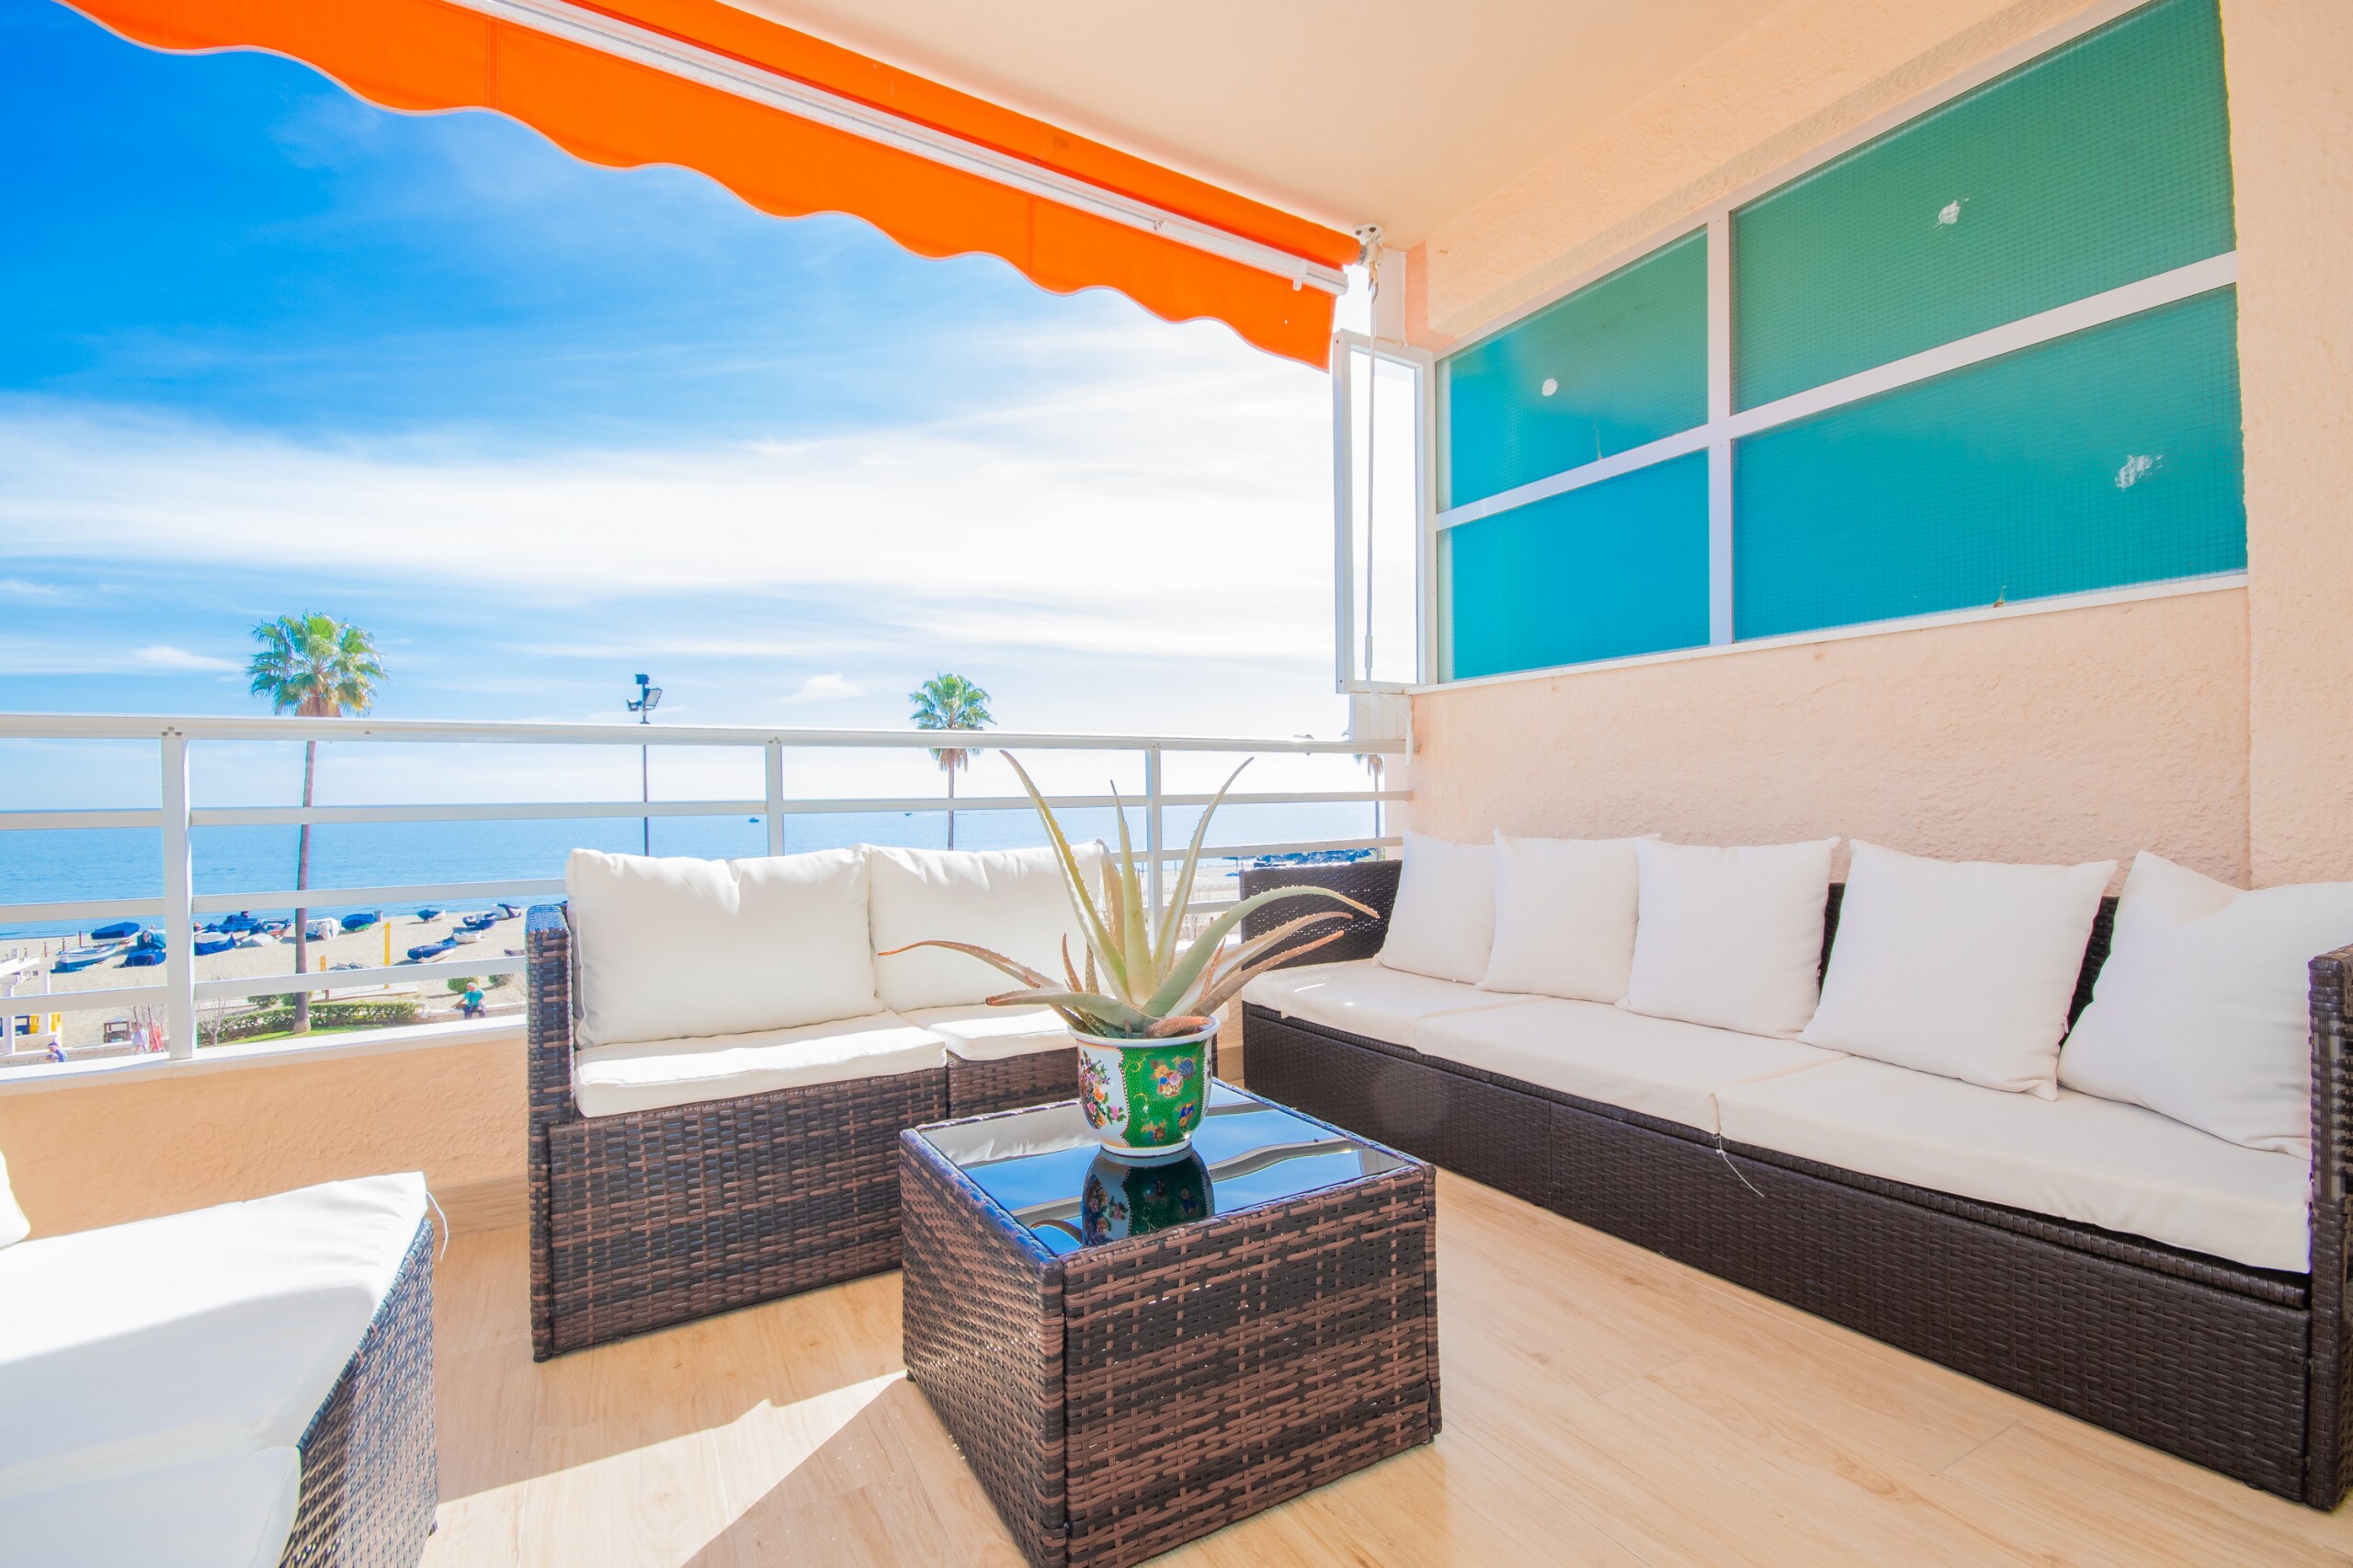 Enjoy the terrace of this apartment in Fuengirola